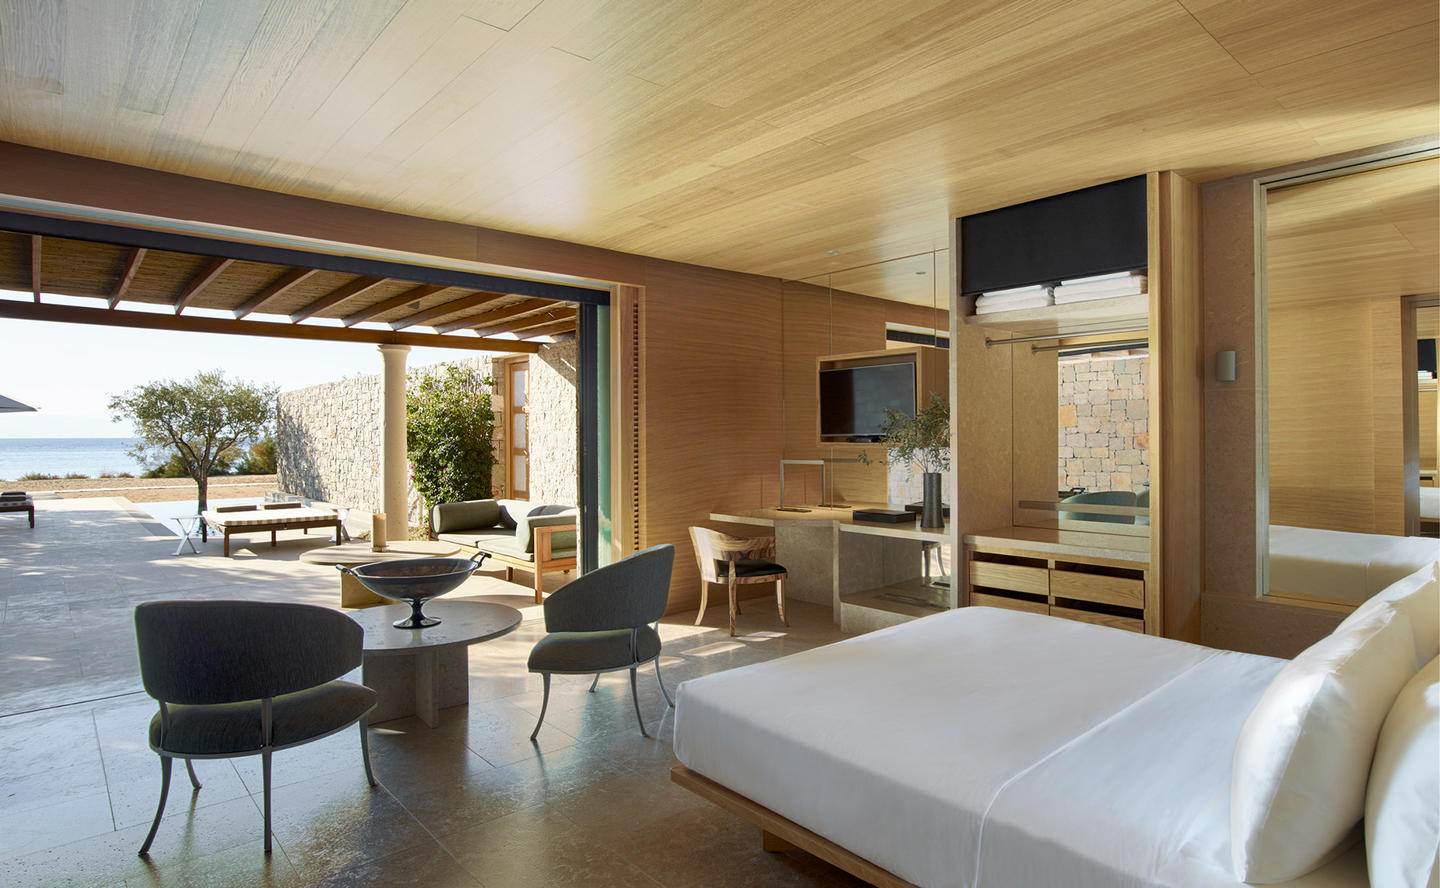 Bedroom looking out onto private terrace and swimming pool, One-Bedroom Beach Cabana - Amanzoe, Greece